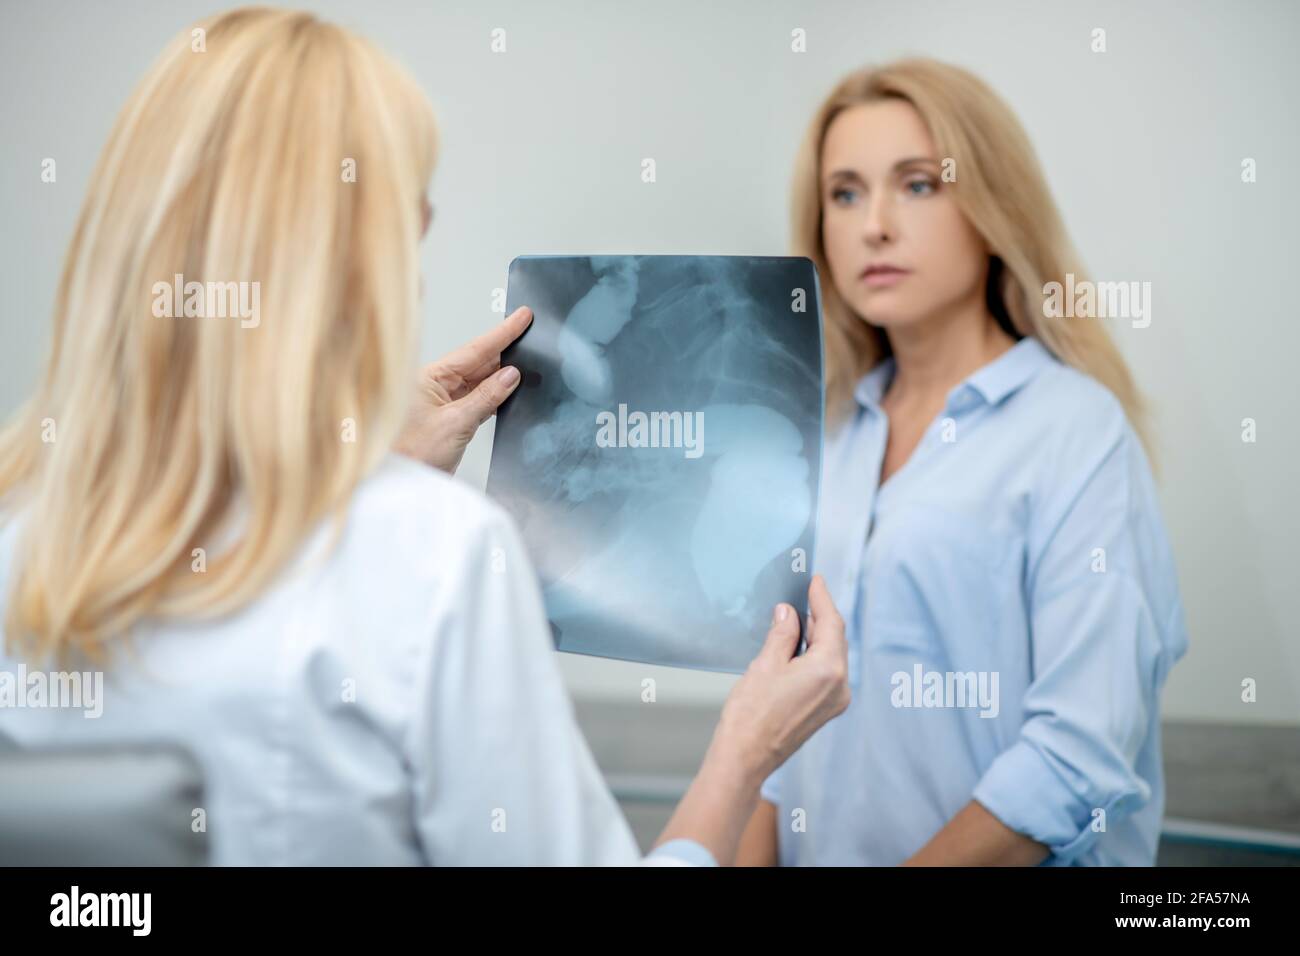 Doctor with back to camera showing x-ray to patient Stock Photo